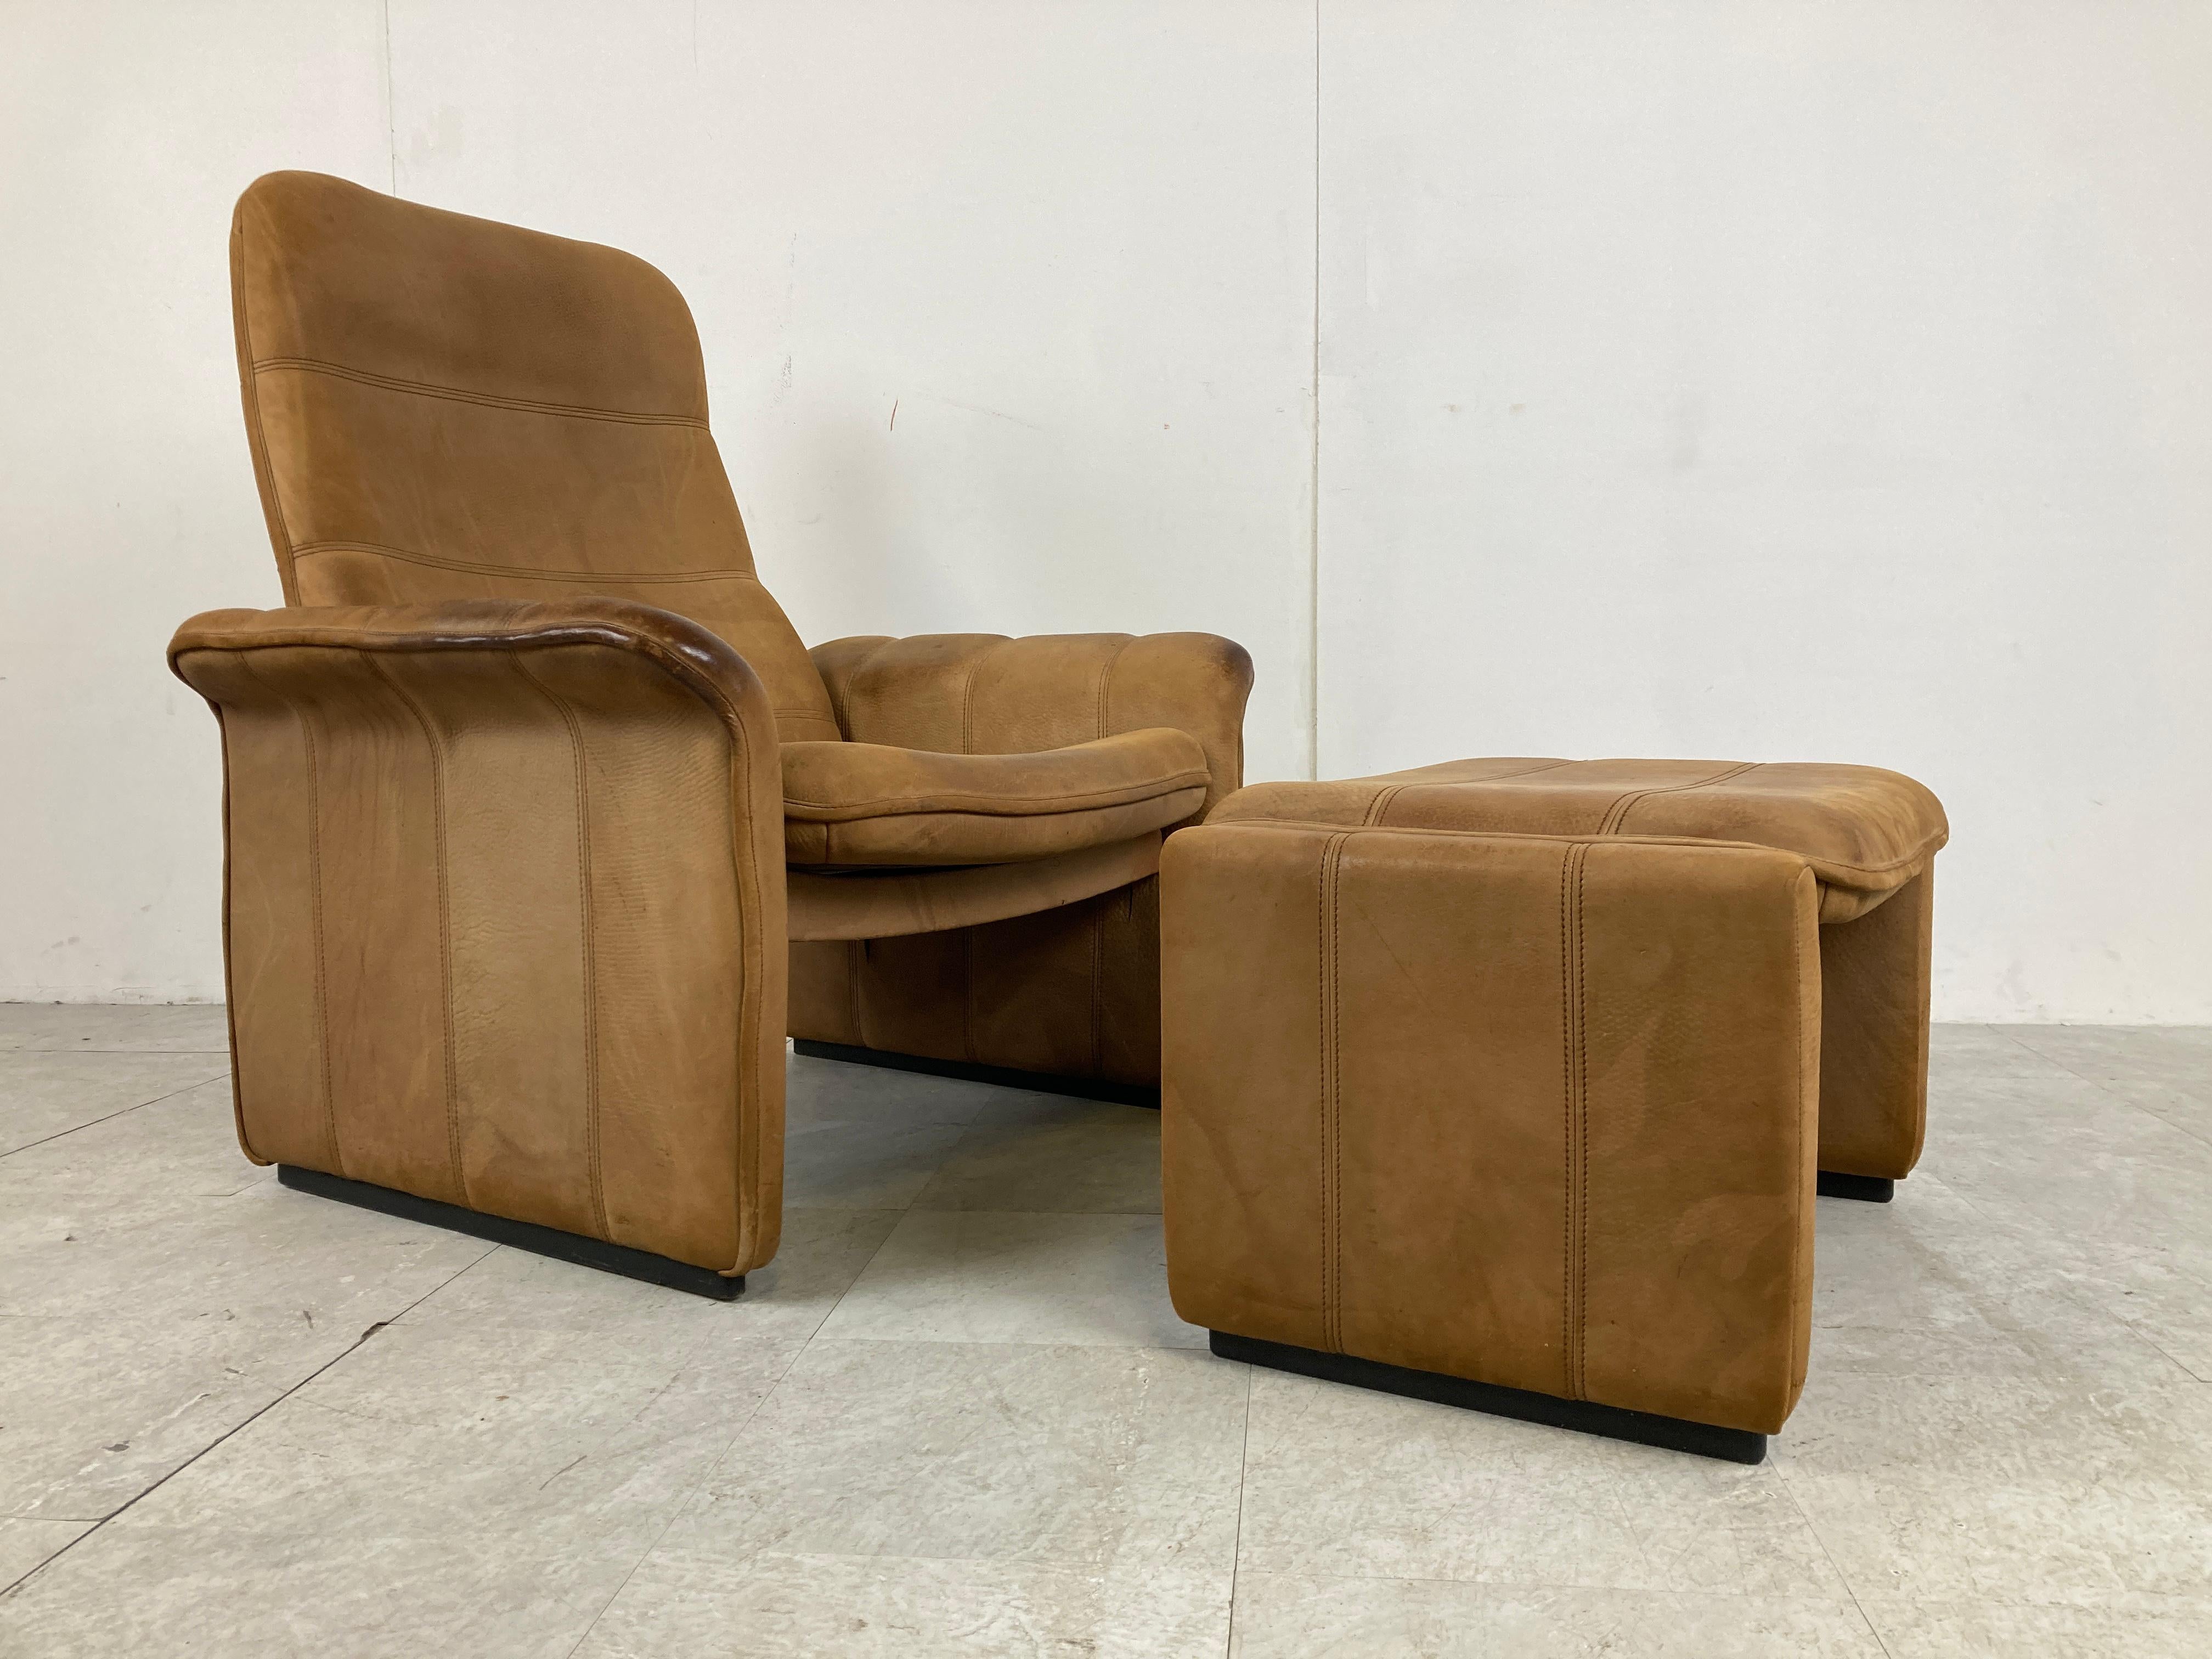 Vintage Ds 50 Leather Lounge Chair and Ottoman by De Sede, 1970s For Sale 2